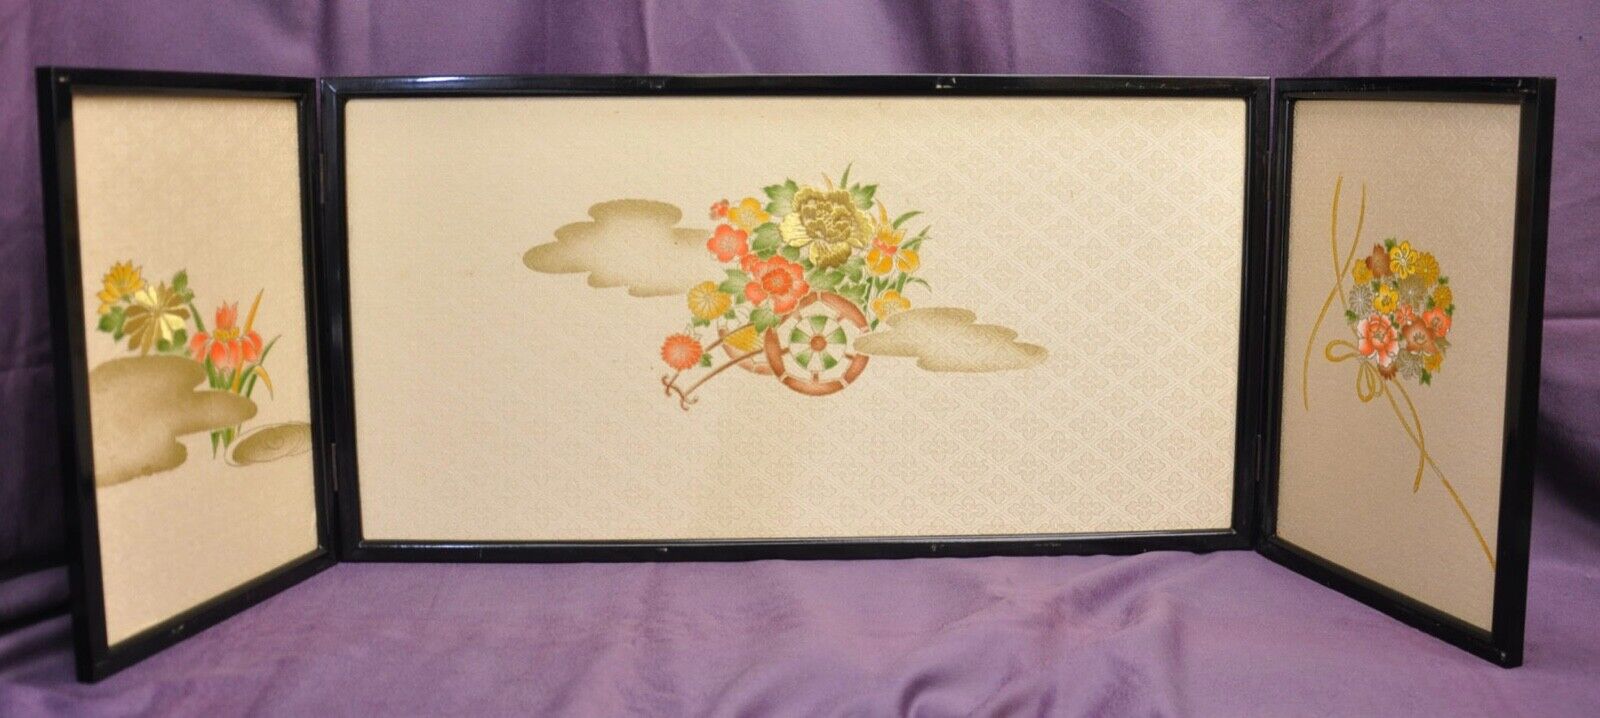 Cool Vintage Japanese Hand Drawn Folding Screen for display circa 1970s (FKA)